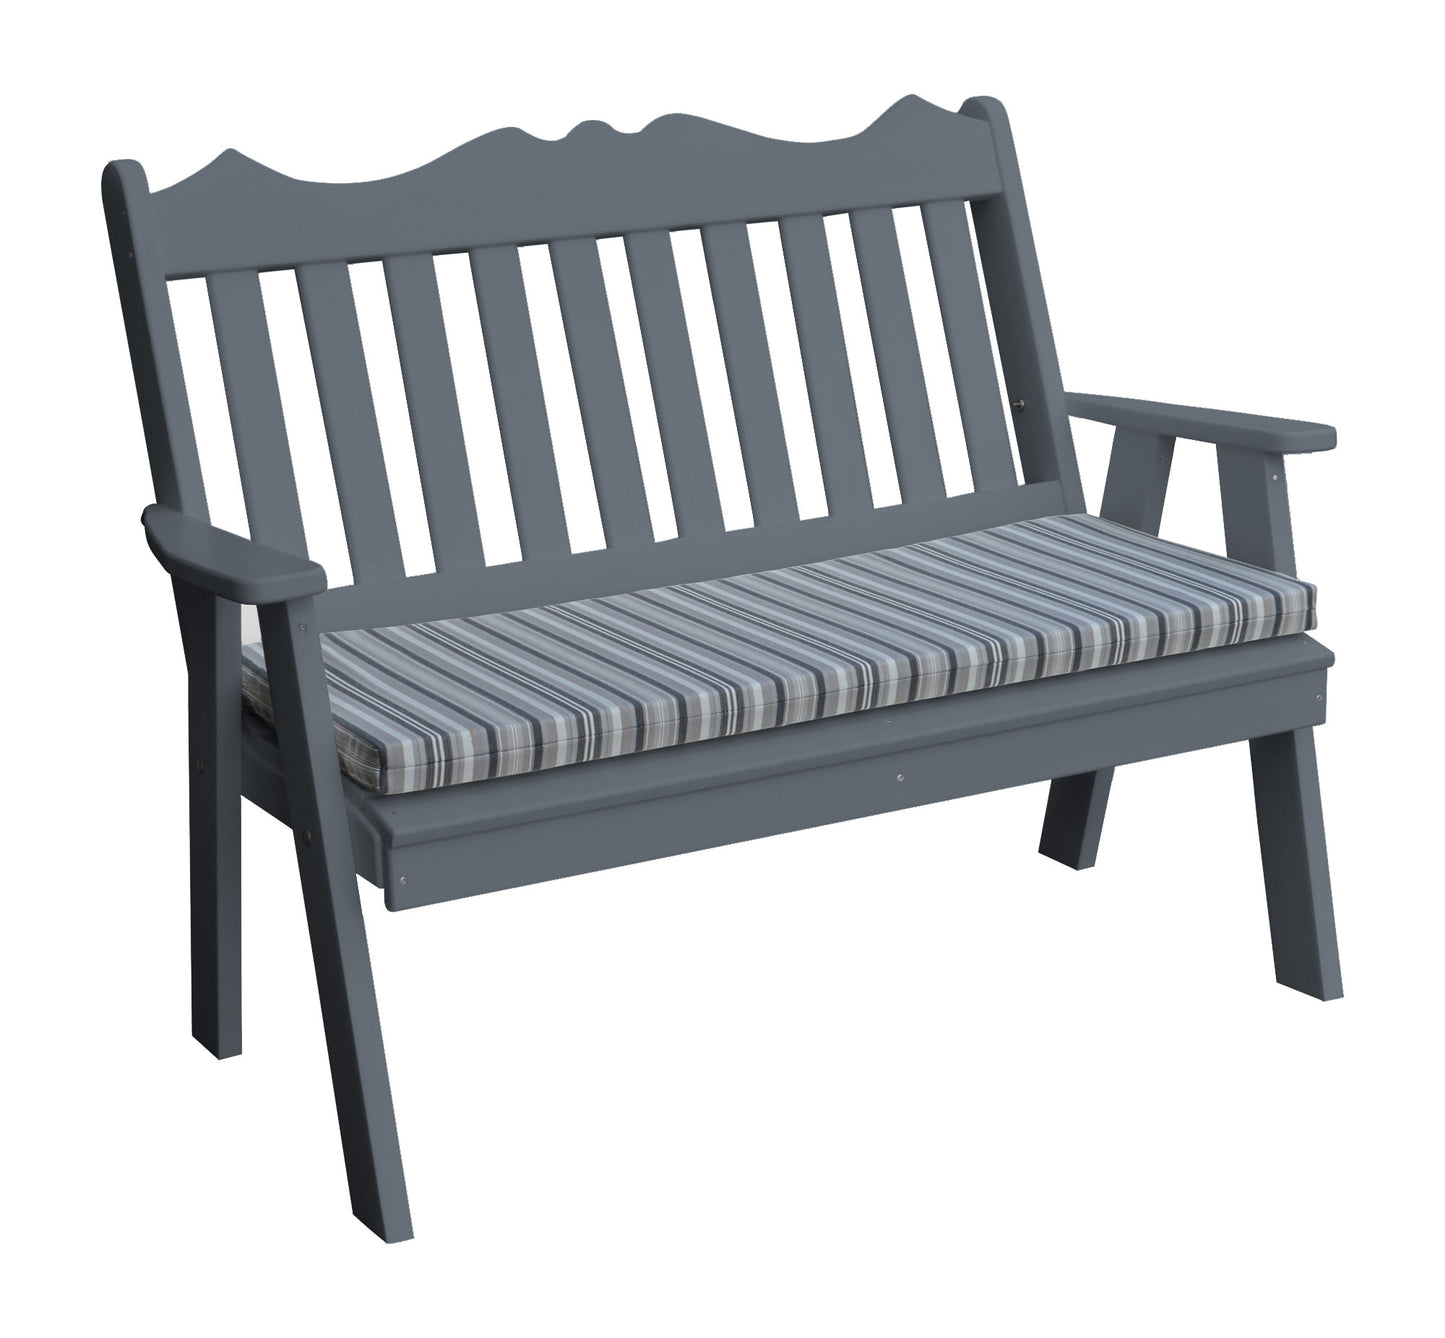 A&L Furniture Company Recycled Plastic 5' Royal English Garden Bench - LEAD TIME TO SHIP 10 BUSINESS DAYS